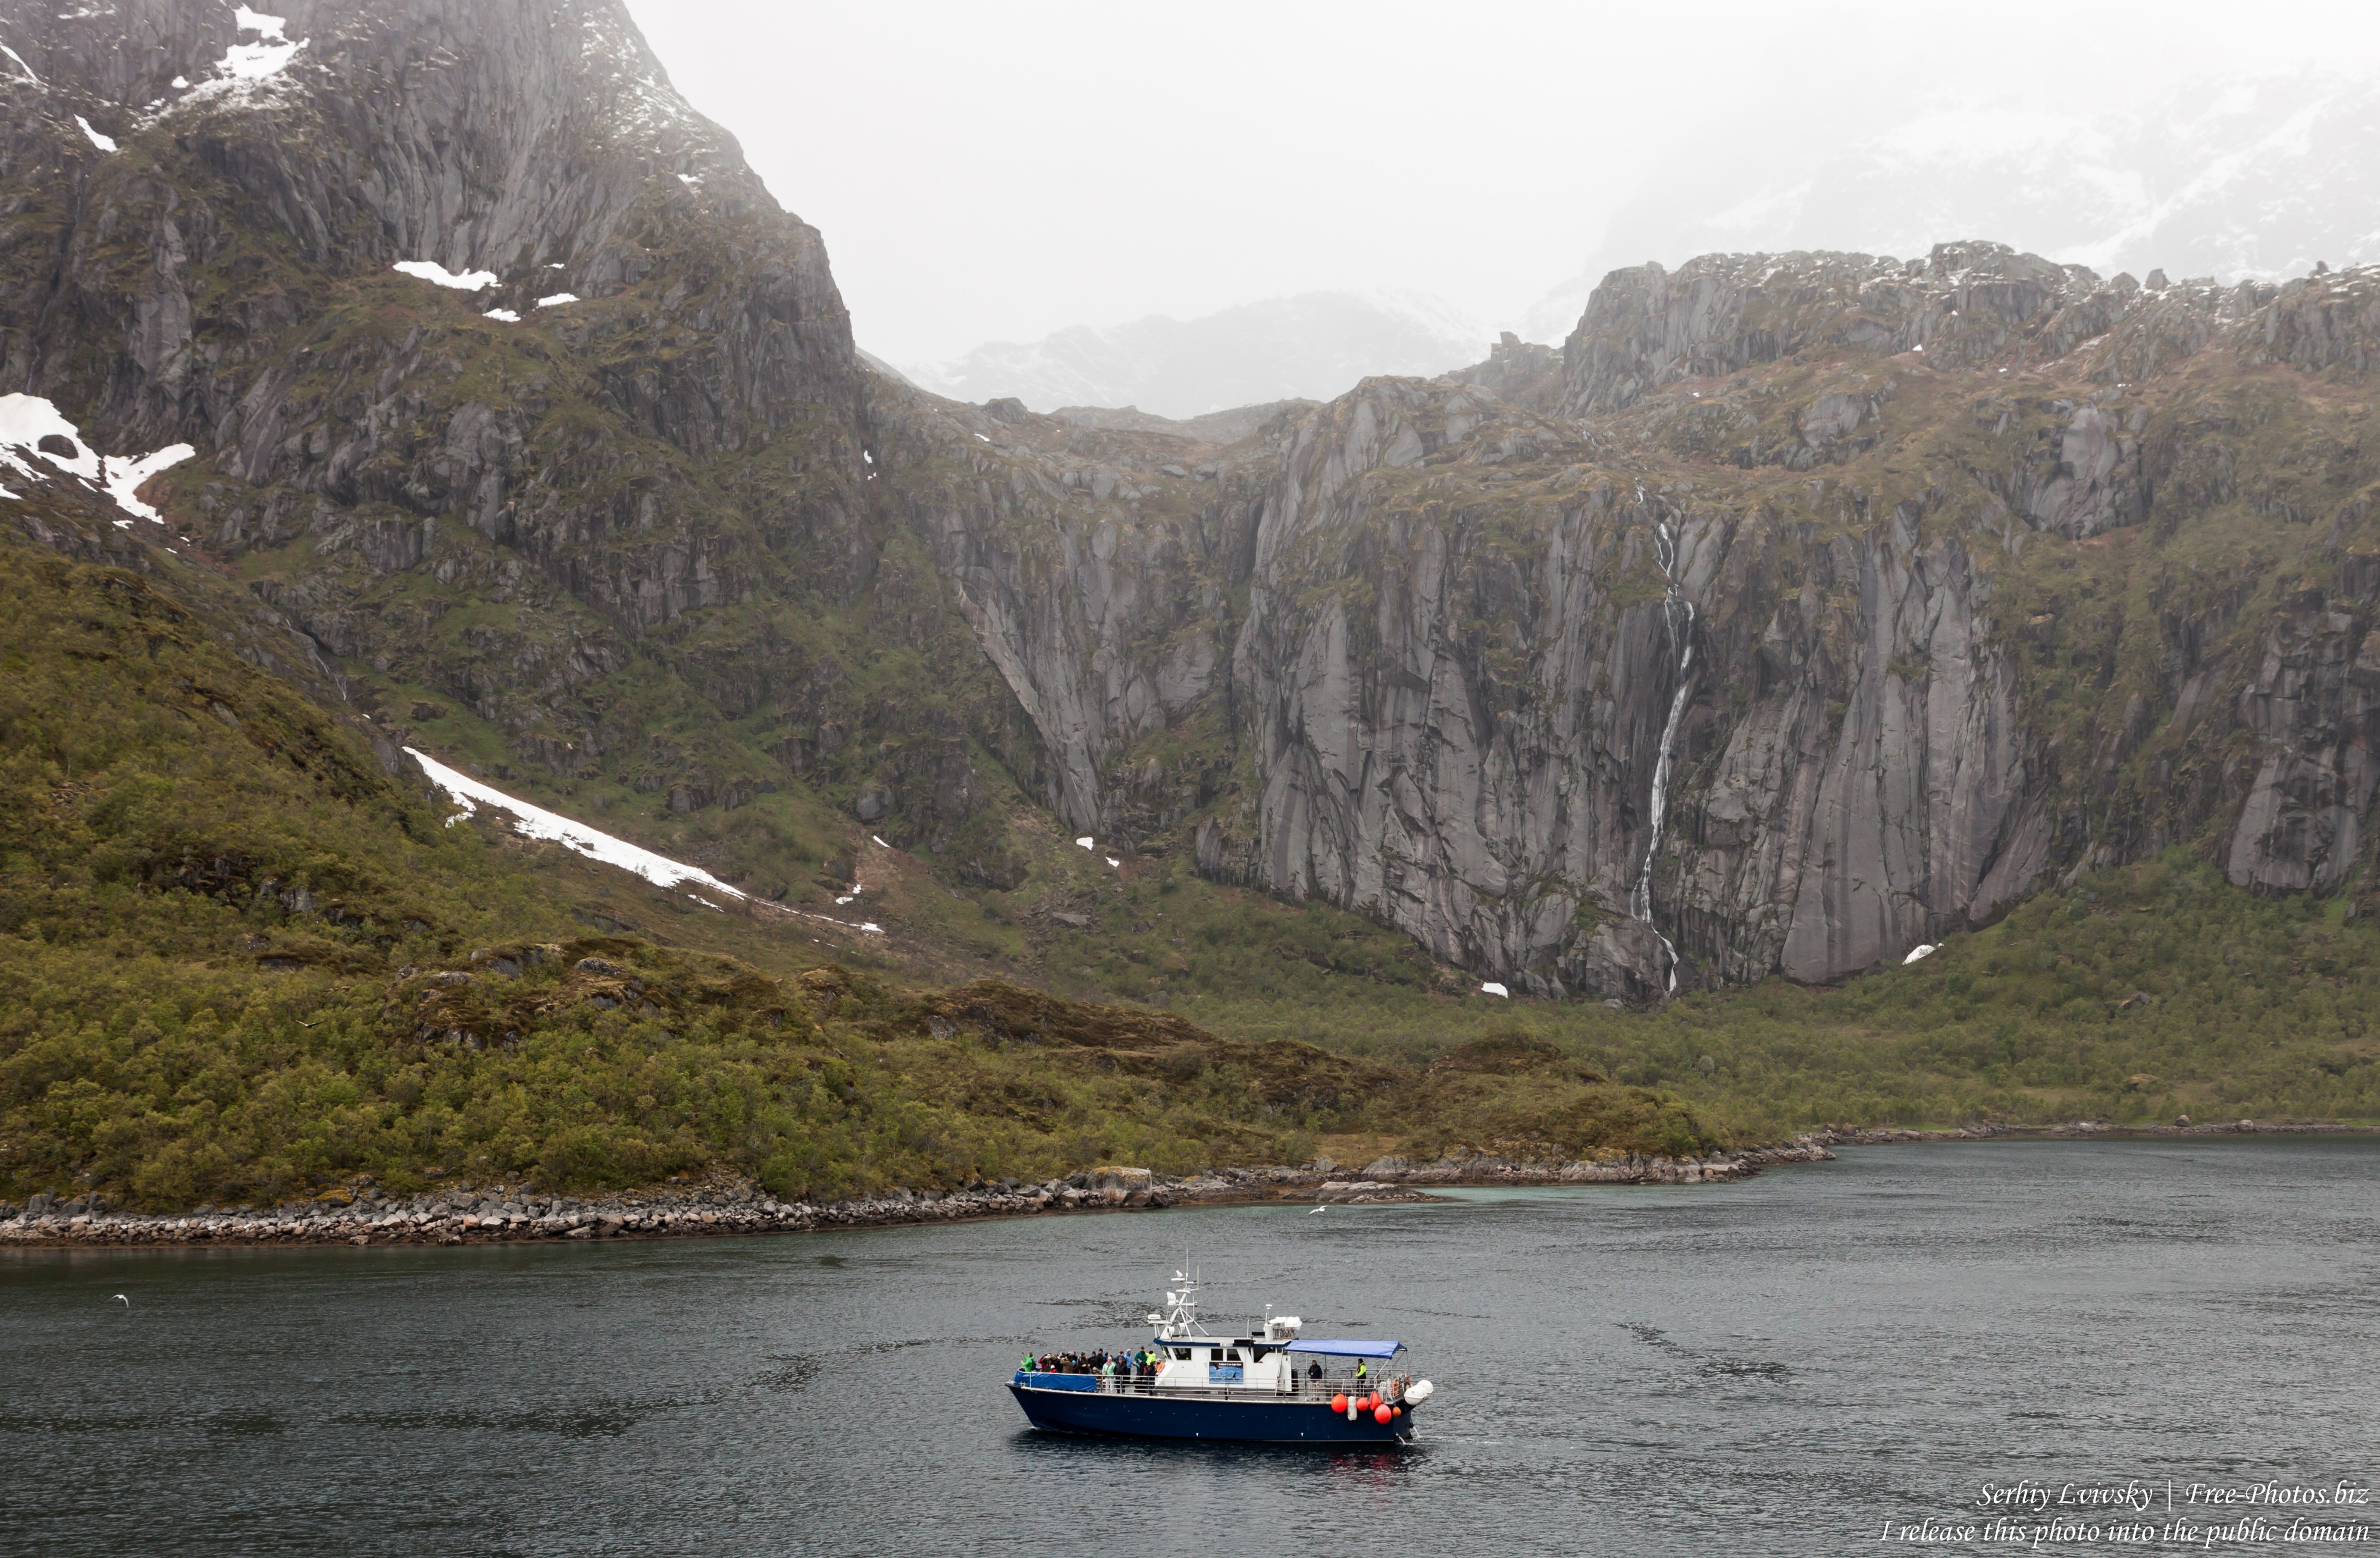 way from Stokmarknes to Trollfjord, Norway, photographed in June 2018 by Serhiy Lvivsky, picture 11